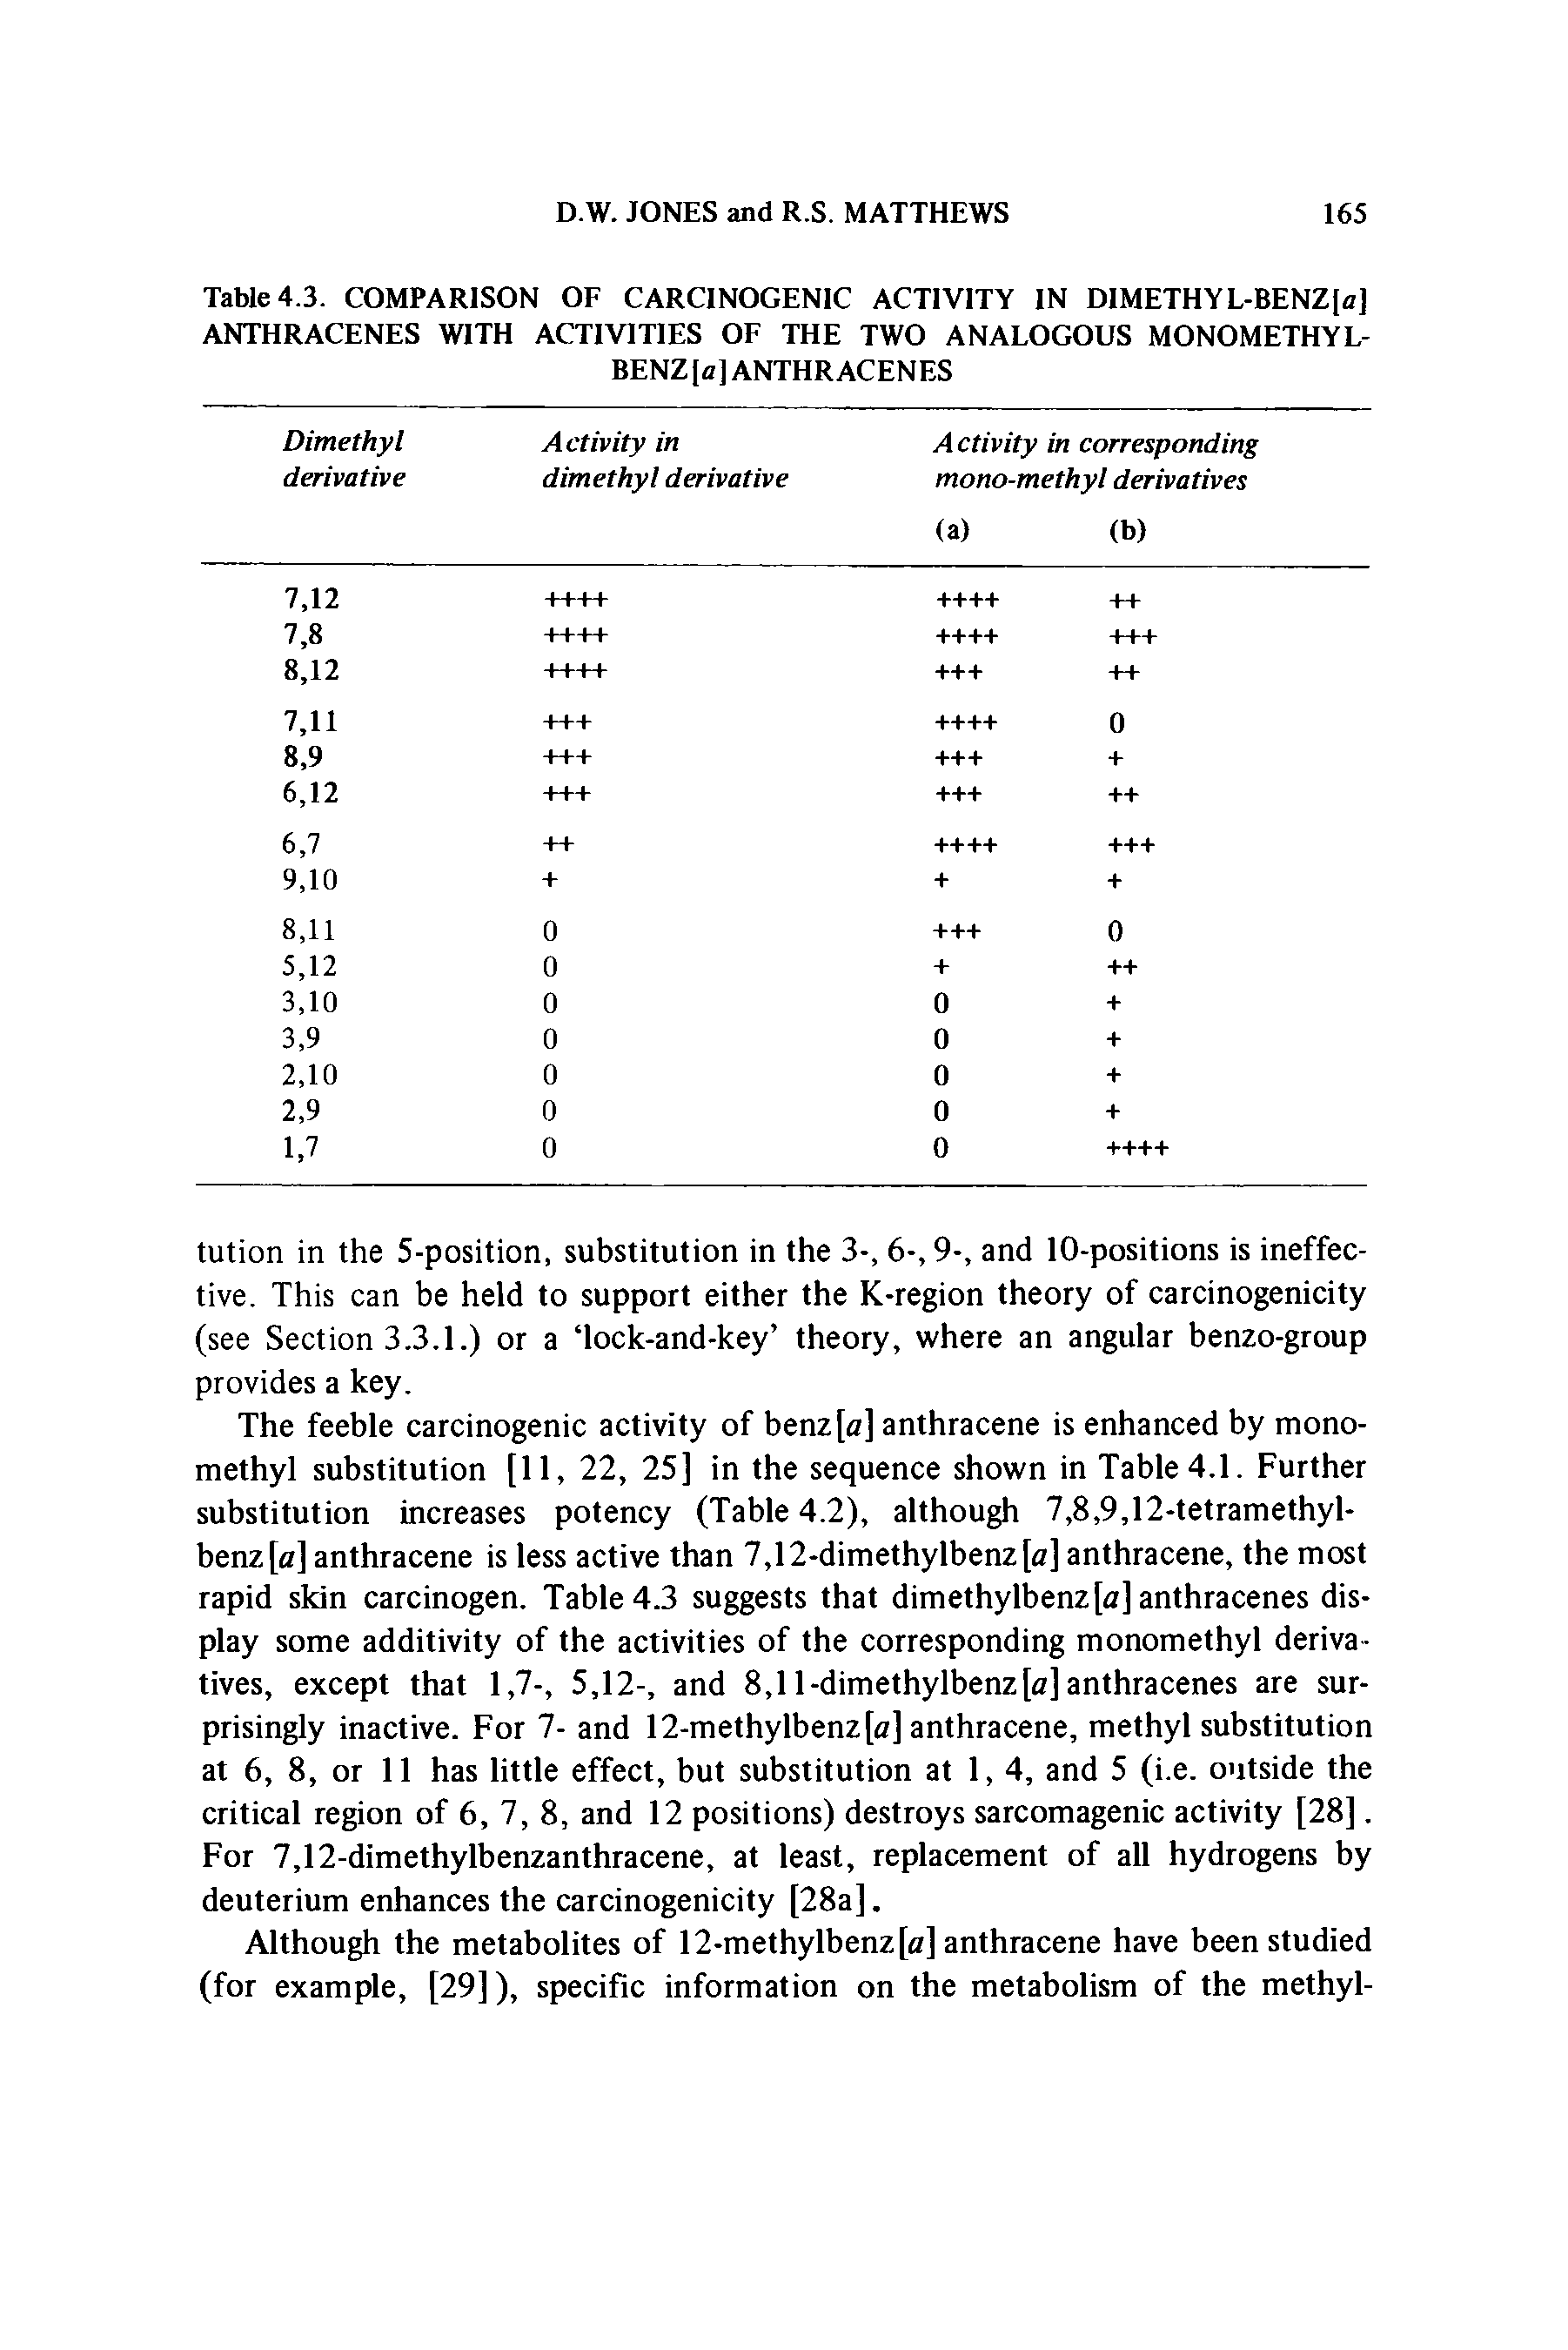 Table 4.3. COMPARISON OF CARCINOGENIC ACTIVITY IN DlMETHYL-BENZfflJ ANTHRACENES WITH ACTIVITIES OF THE TWO ANALOGOUS MONOMETHYL-...